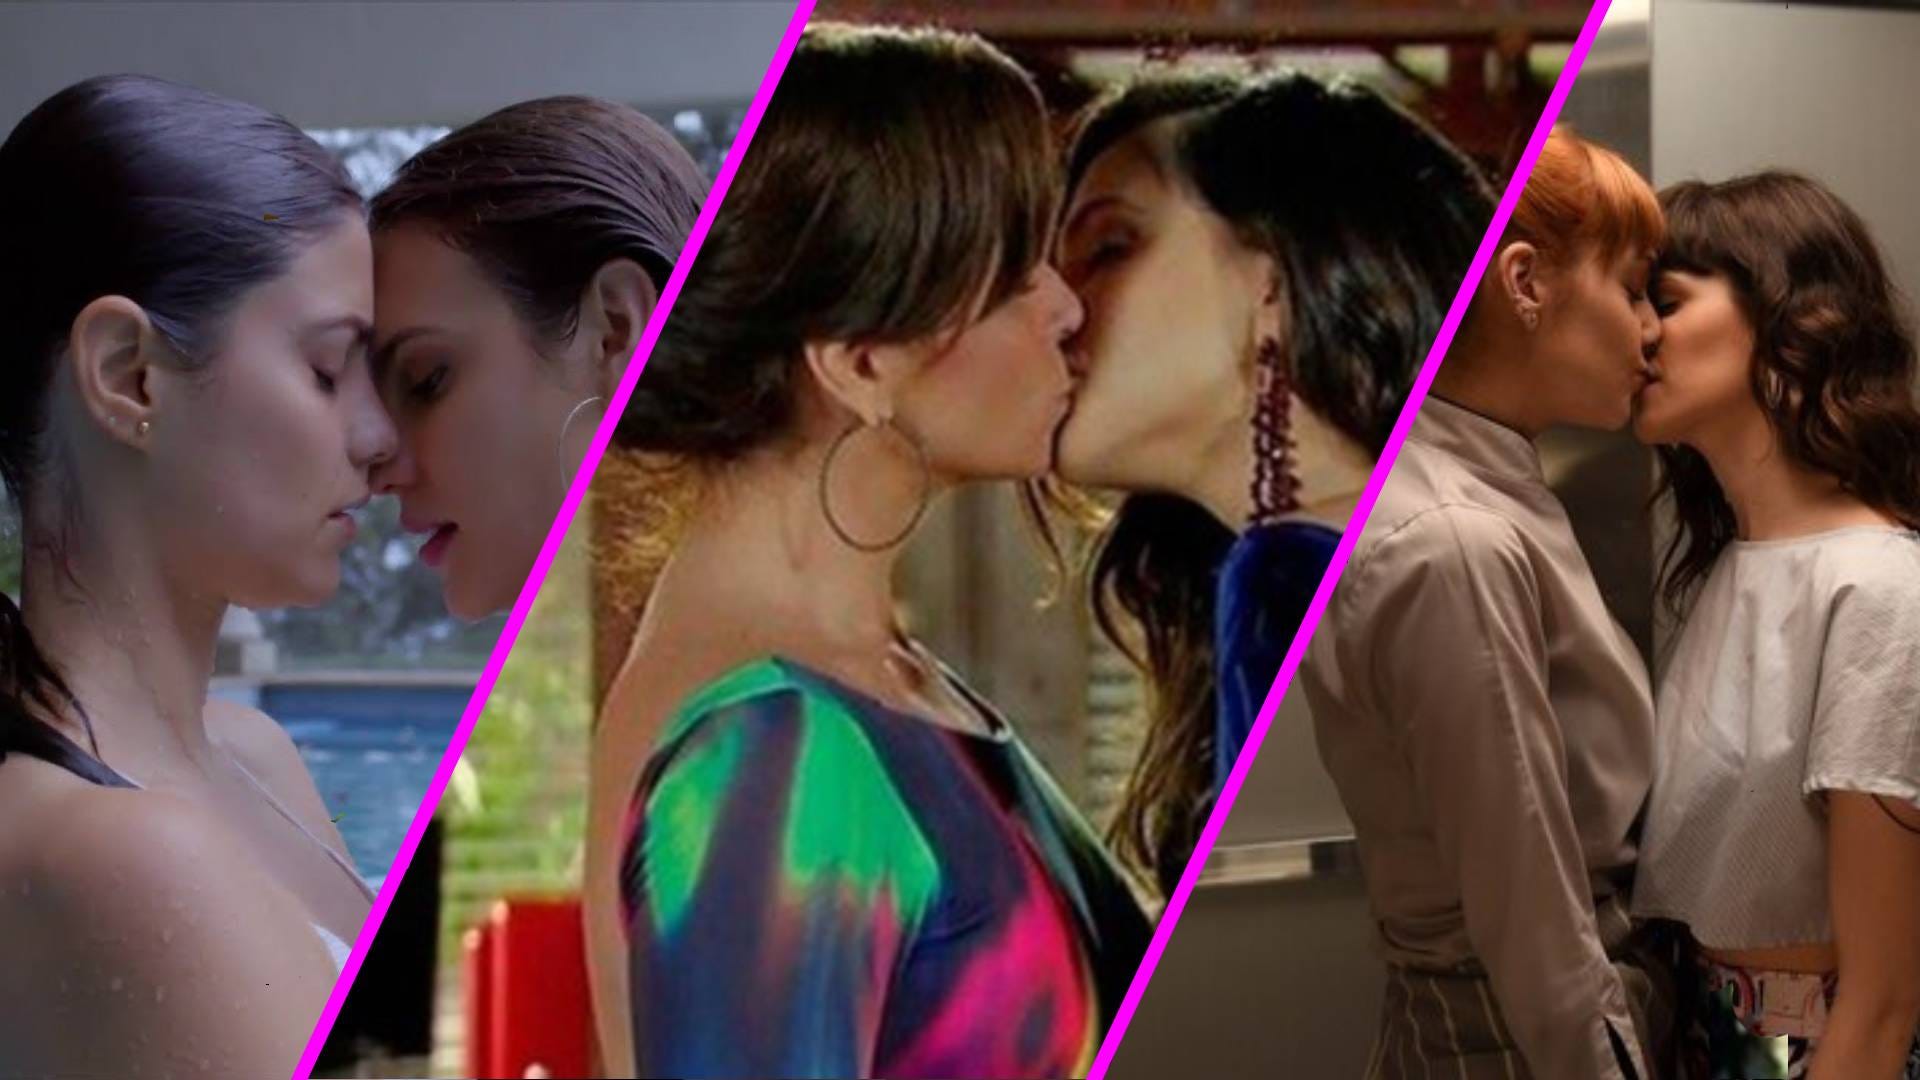 The Soap Opera Lesbians Who Changed The World